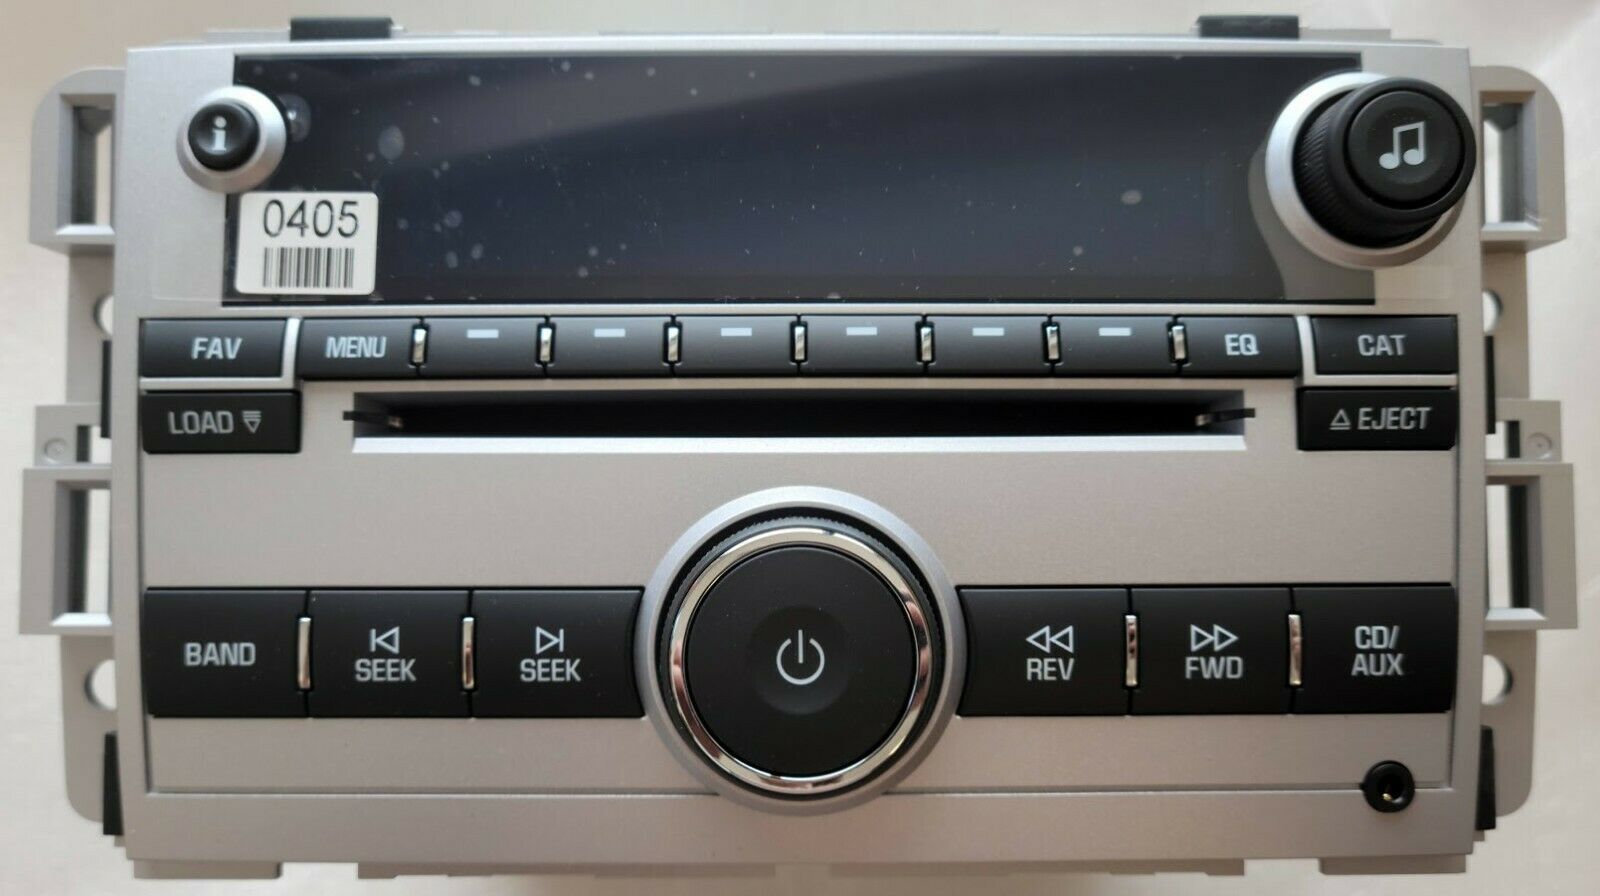 Primary image for Chevy Equinox 2008 CD6 MP3 XM capable radio. OEM CD stereo. NEW factory original